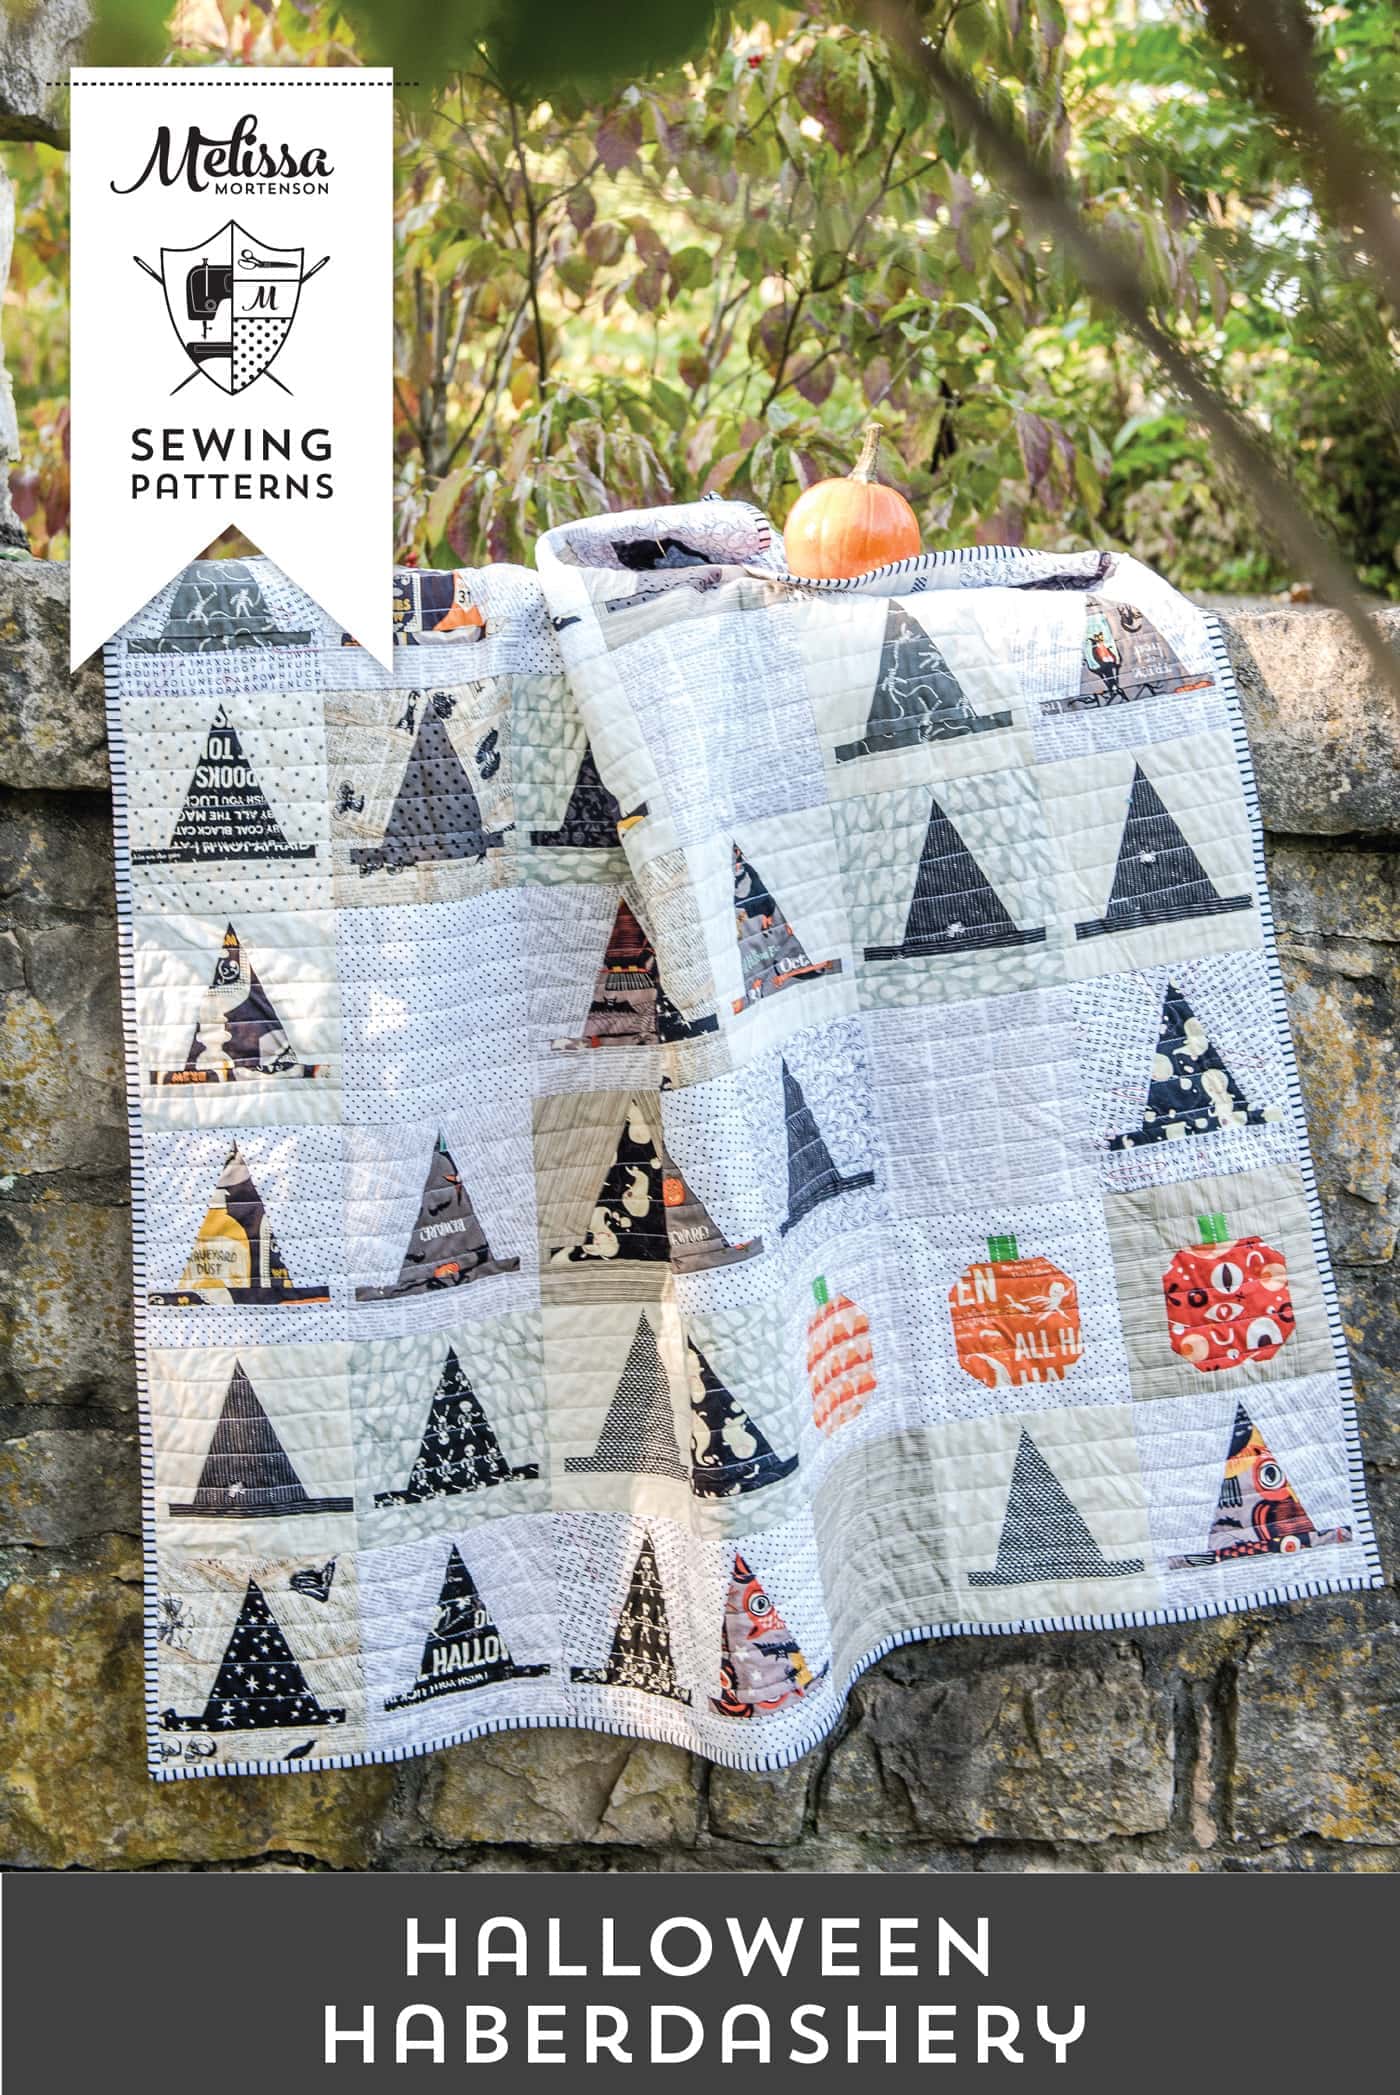 Introducing the Halloween Haberdashery Quilt Pattern